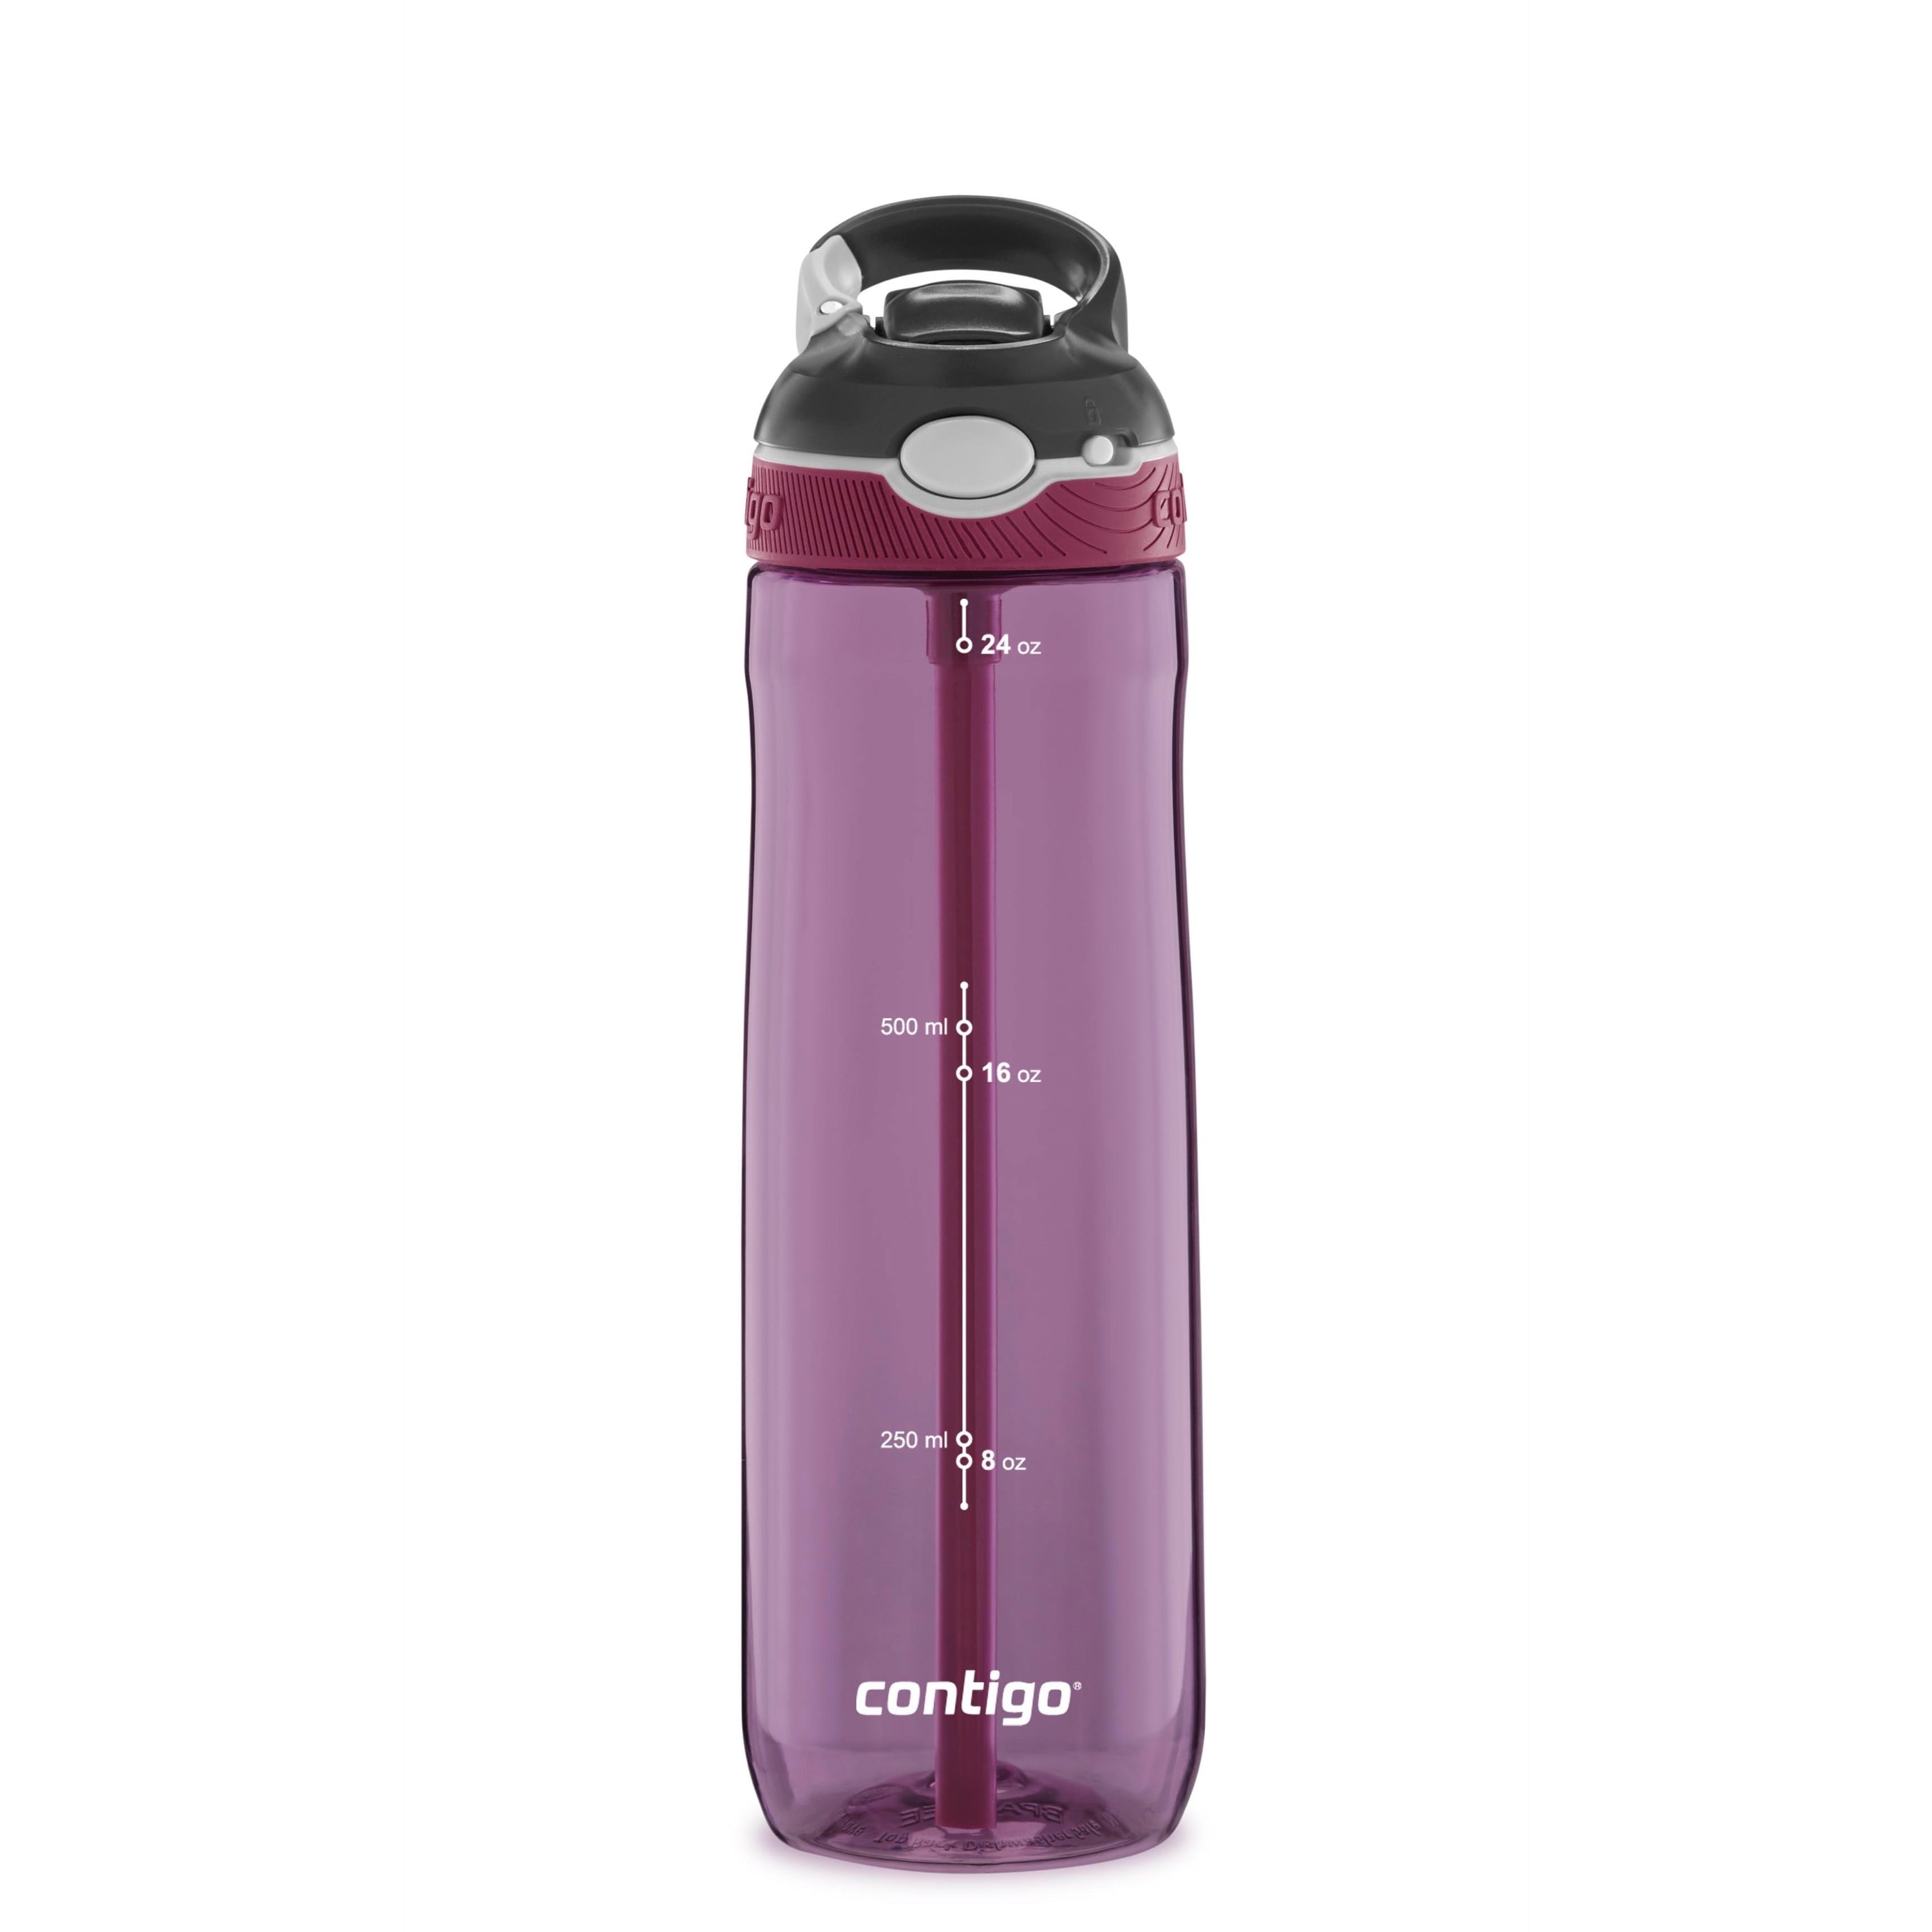 40oz Insulated High Flow Rate Water Bottle w/ AUTOSEAL® Technology